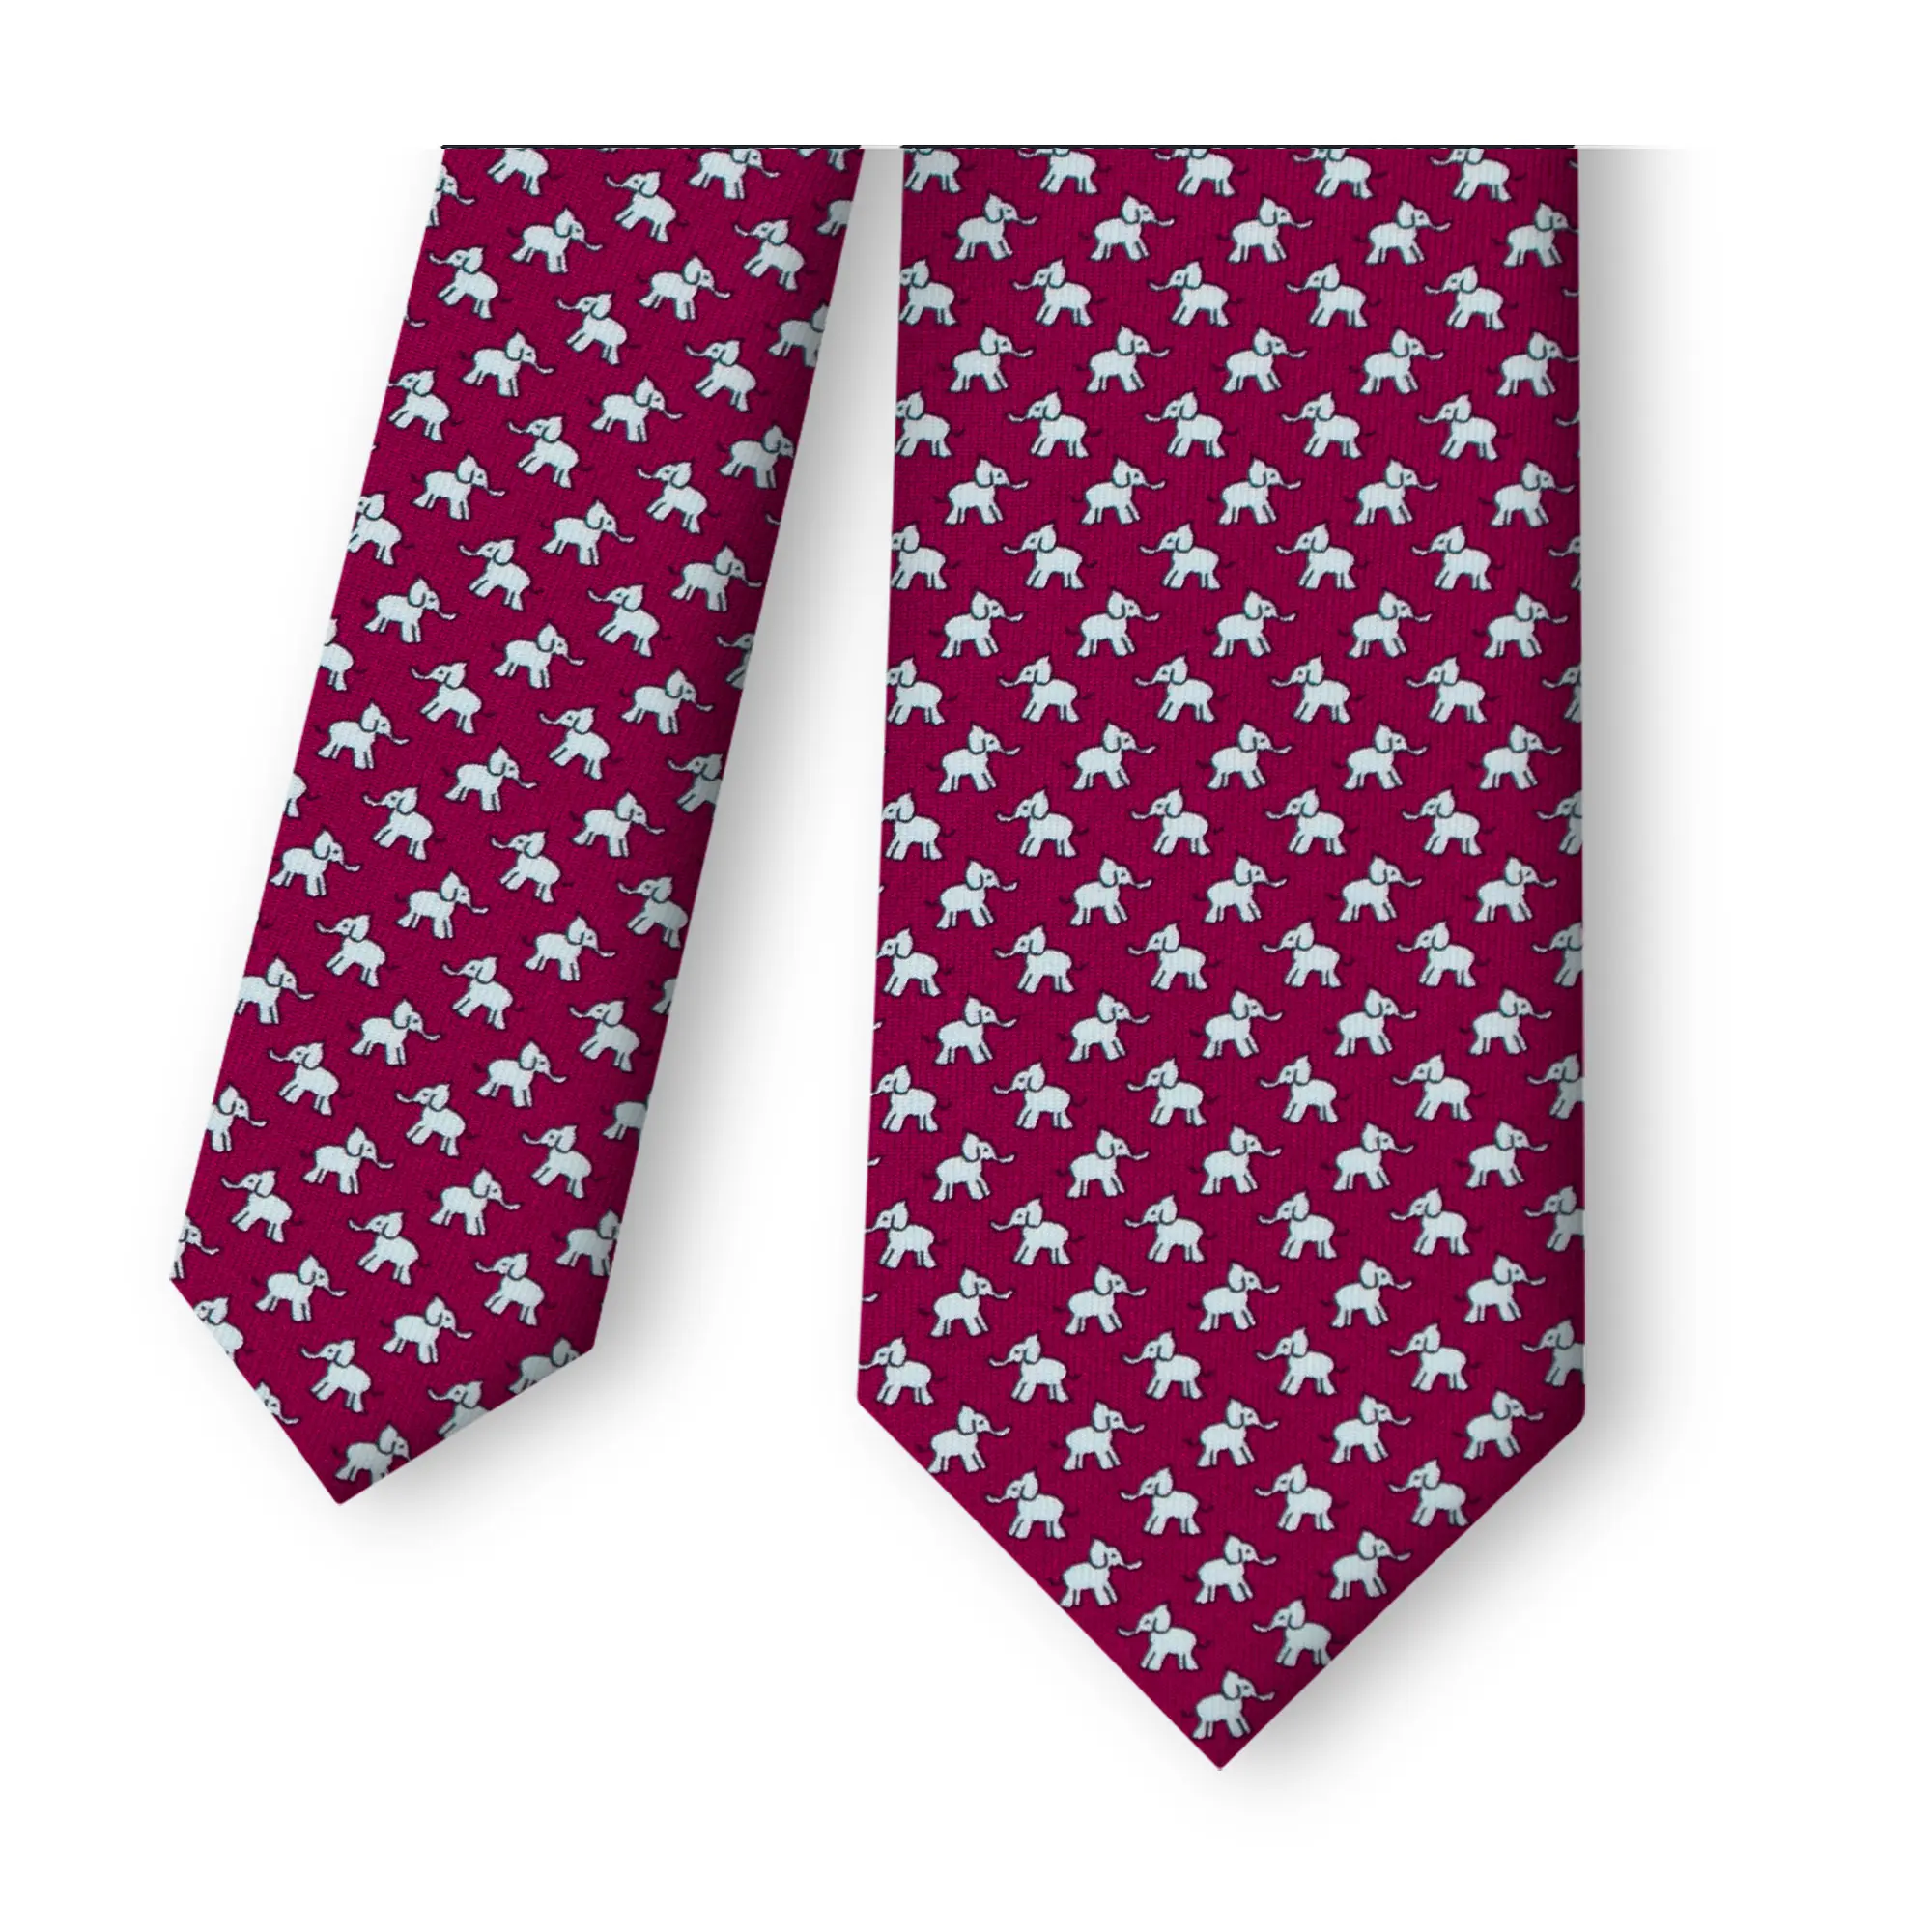 Good Supplier Silk Tie Elephant Bordeaux And White Customizable Man Accessories Ready To Wear For Birthday Dinner